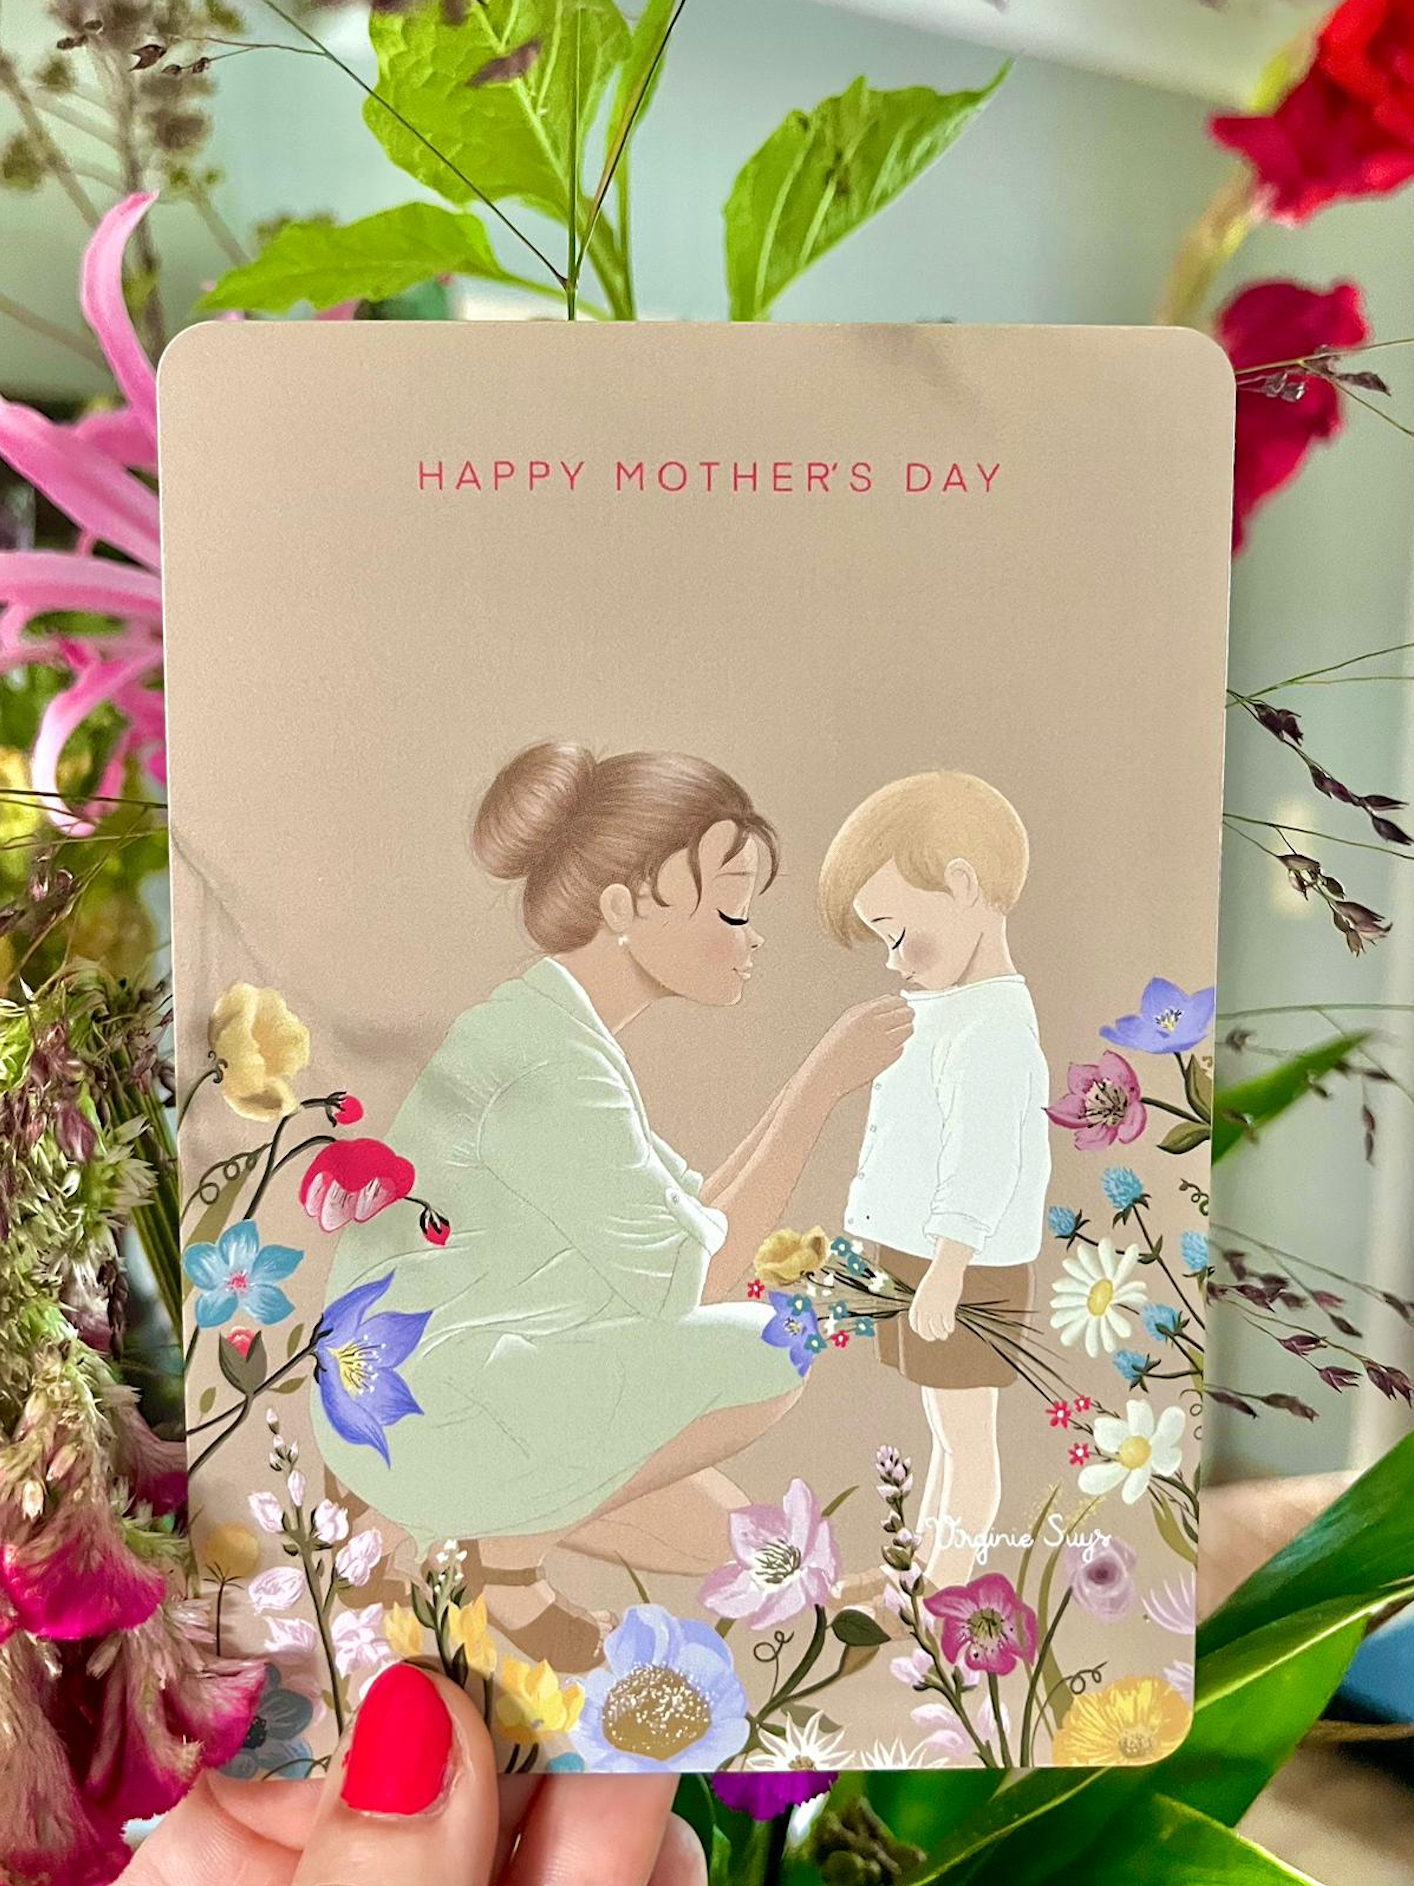 Wishcards - happy mother's day - boy with short pants